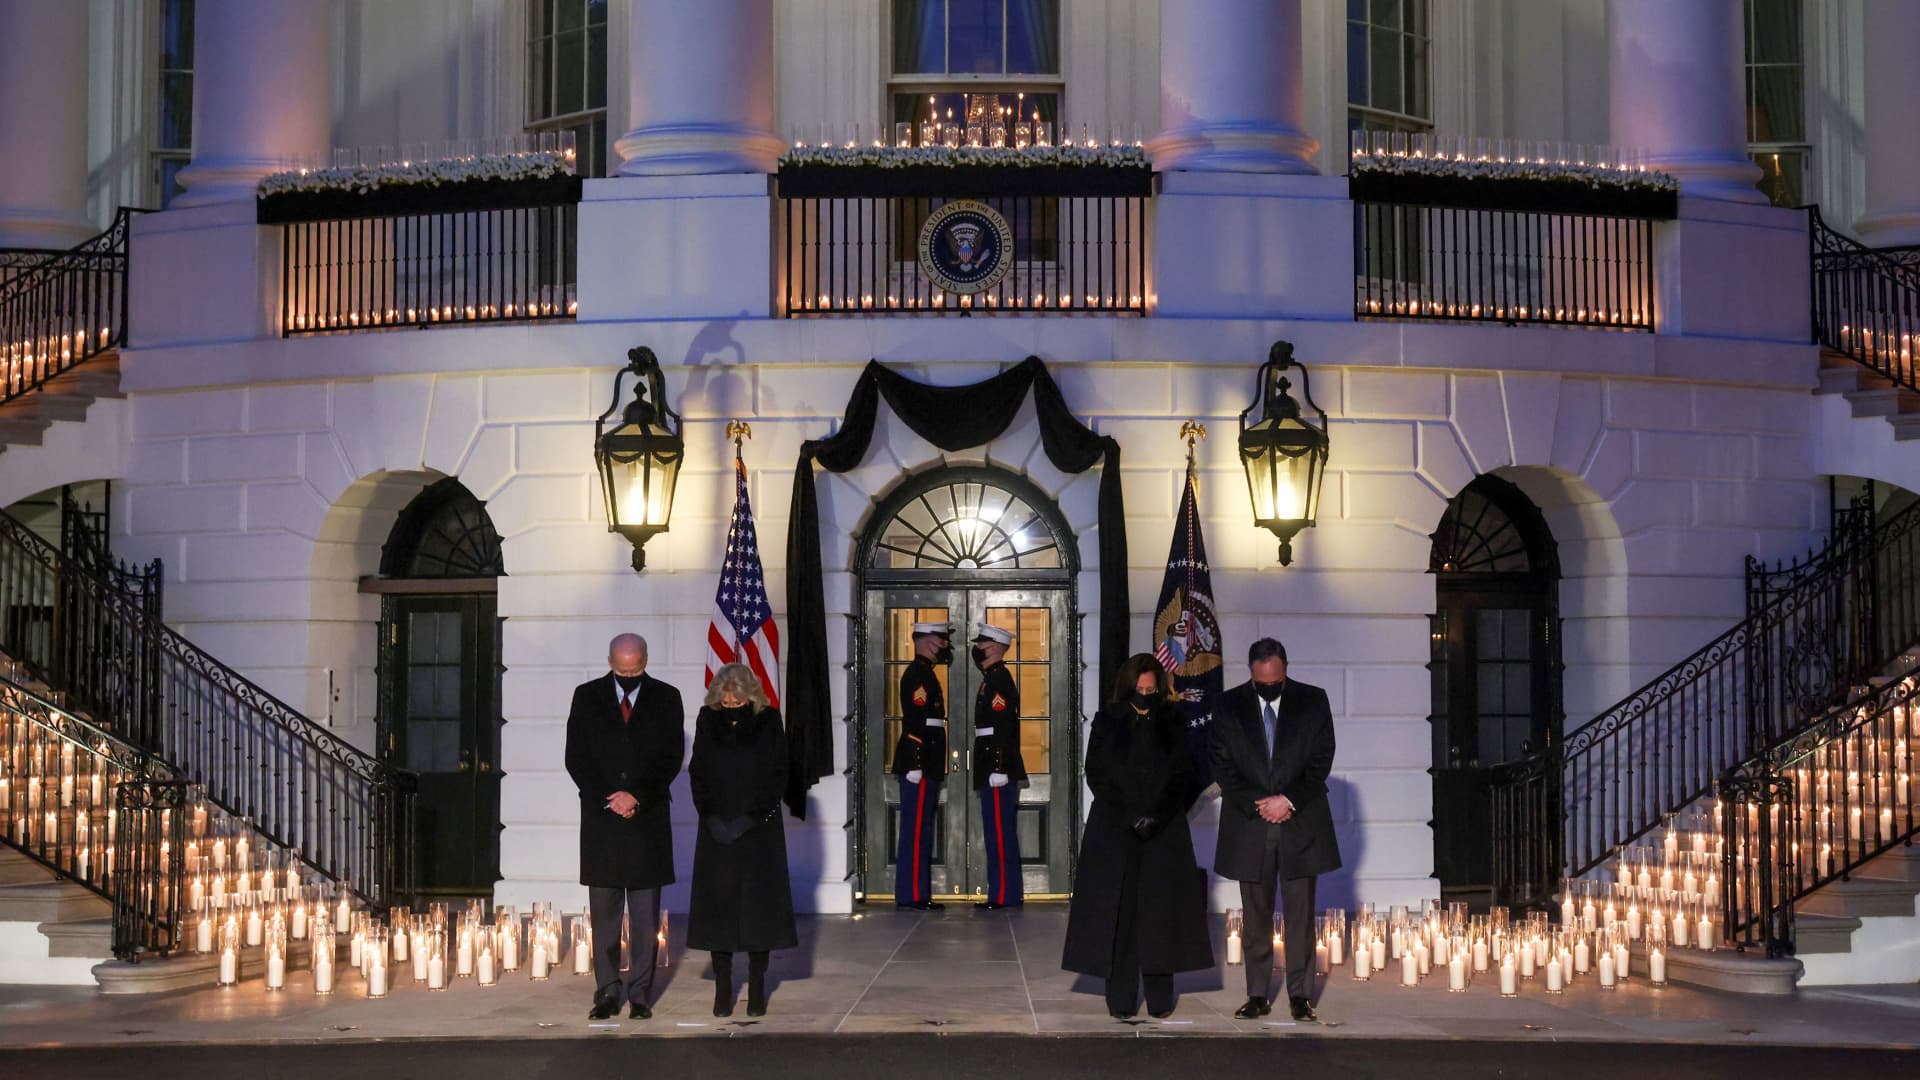 President Joe Biden, his wife Jill Biden, U.S. Vice President Kamala Harris and Second Gentleman Doug Emhoff attend a moment of silence and candle lighting ceremony to commemorate the grim milestone of 500,000 U.S. deaths from the coronavirus disease (COVID-19) at the White House in Washington, U.S., February 22, 2021.